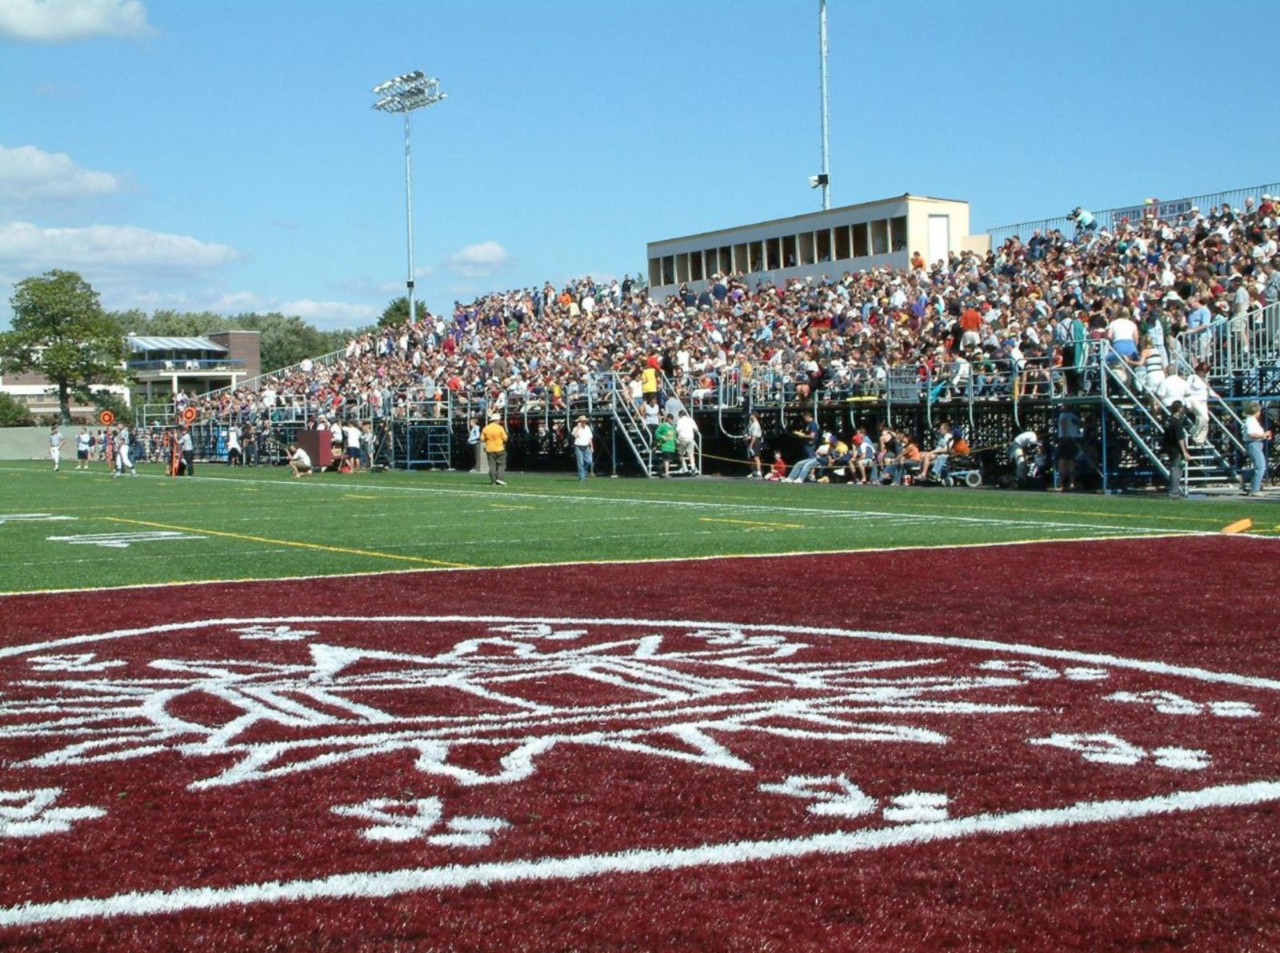 Home-opener football game and inauguration of the new field and temporary stadium